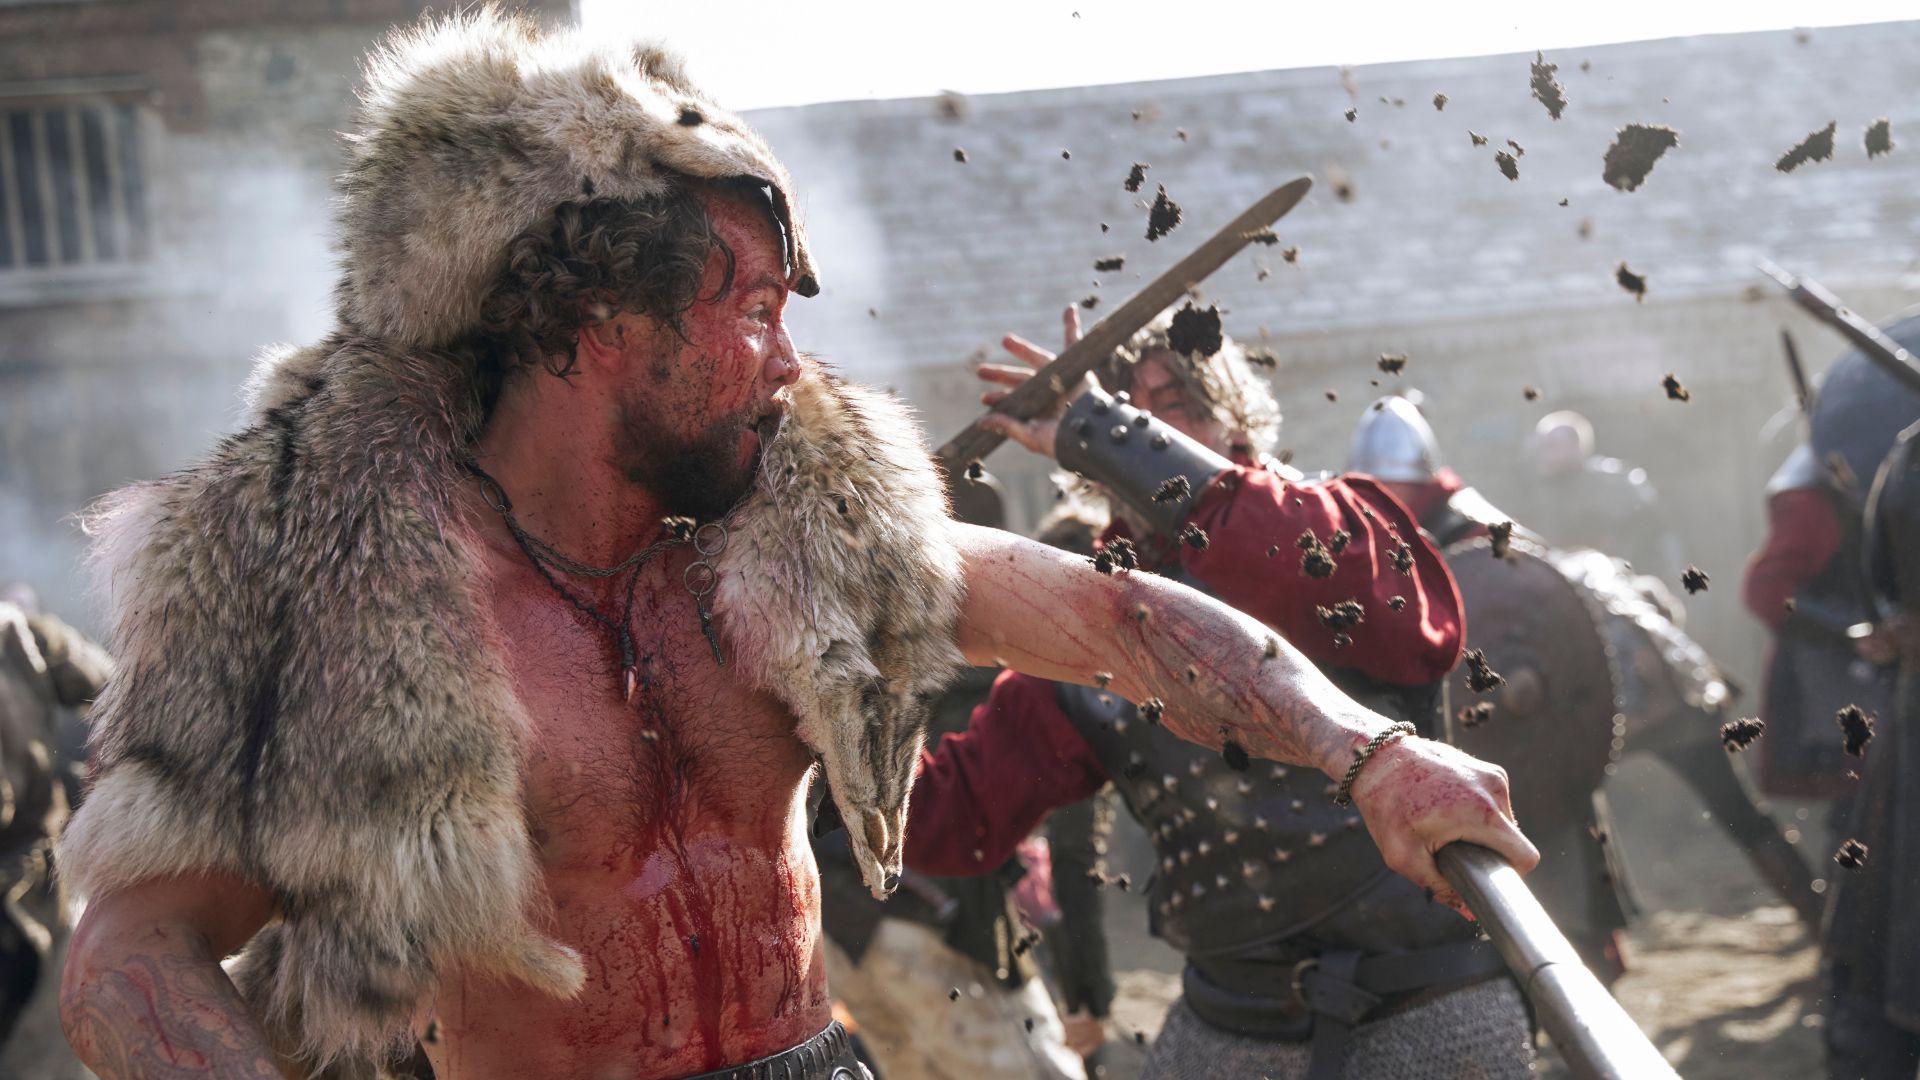 Vikings: Valhalla, one of the best Netflix shows right now